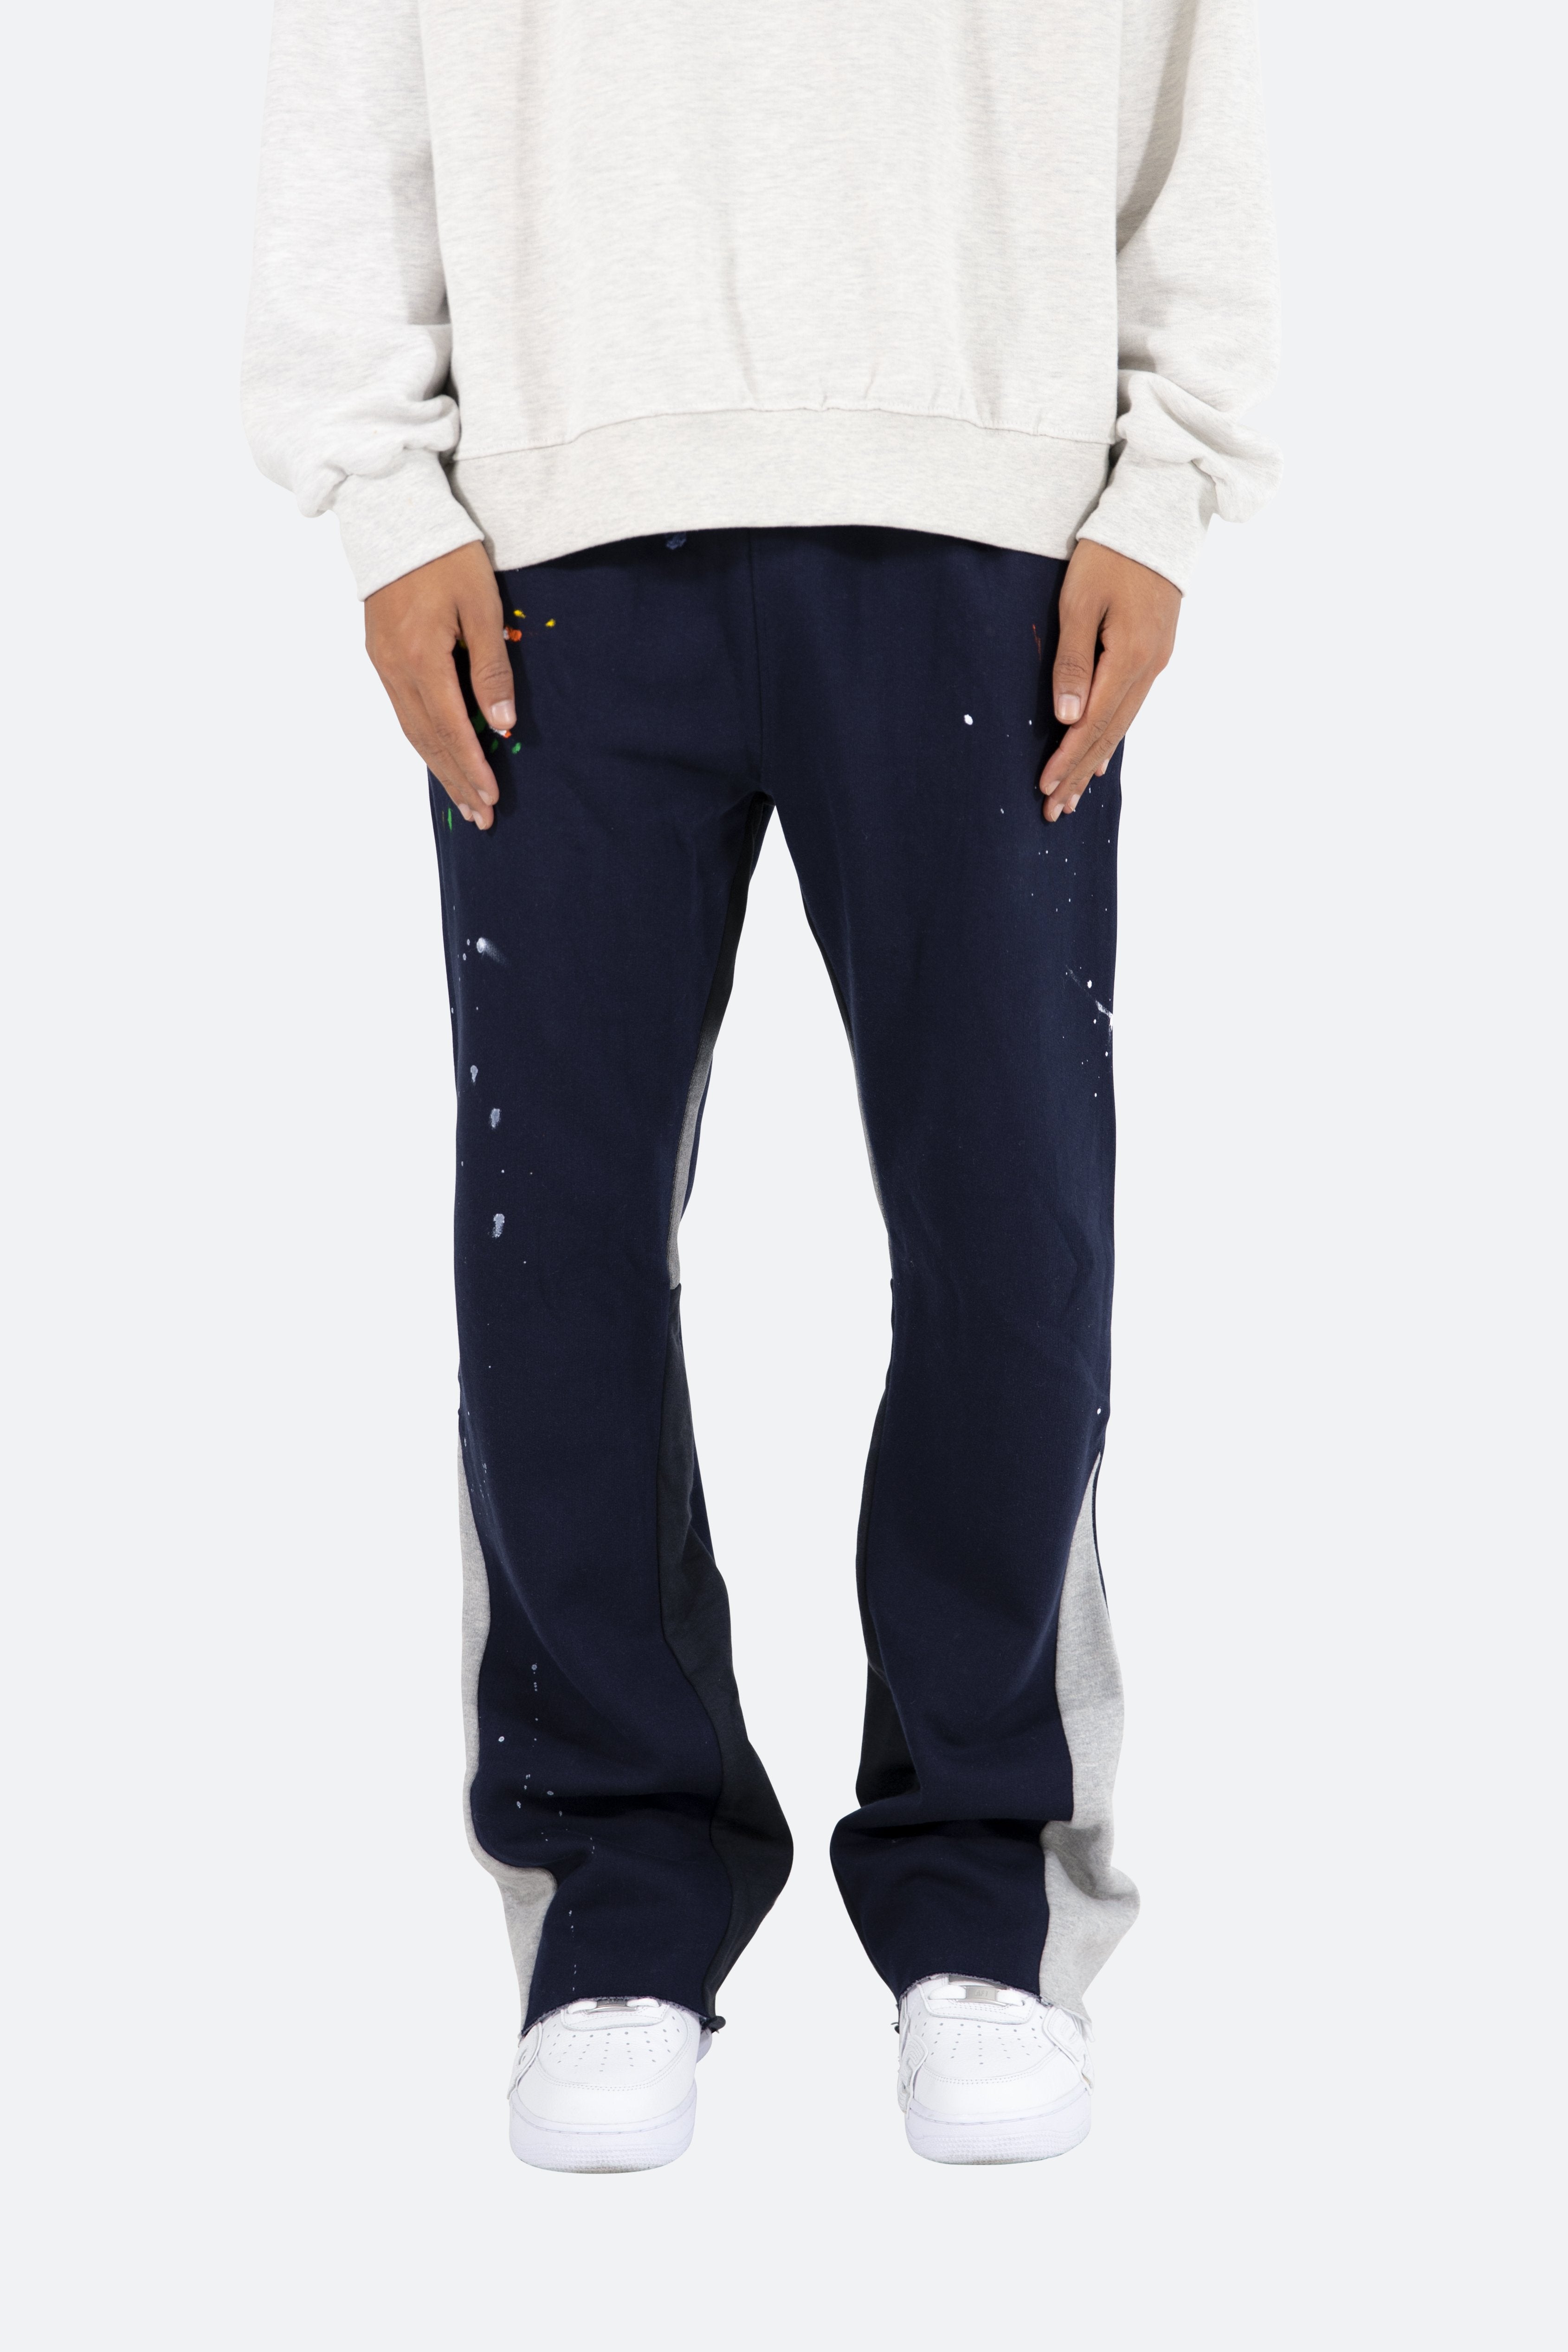 just landed: 5 new Contrast Bootcut Sweatpants Colors - MNML